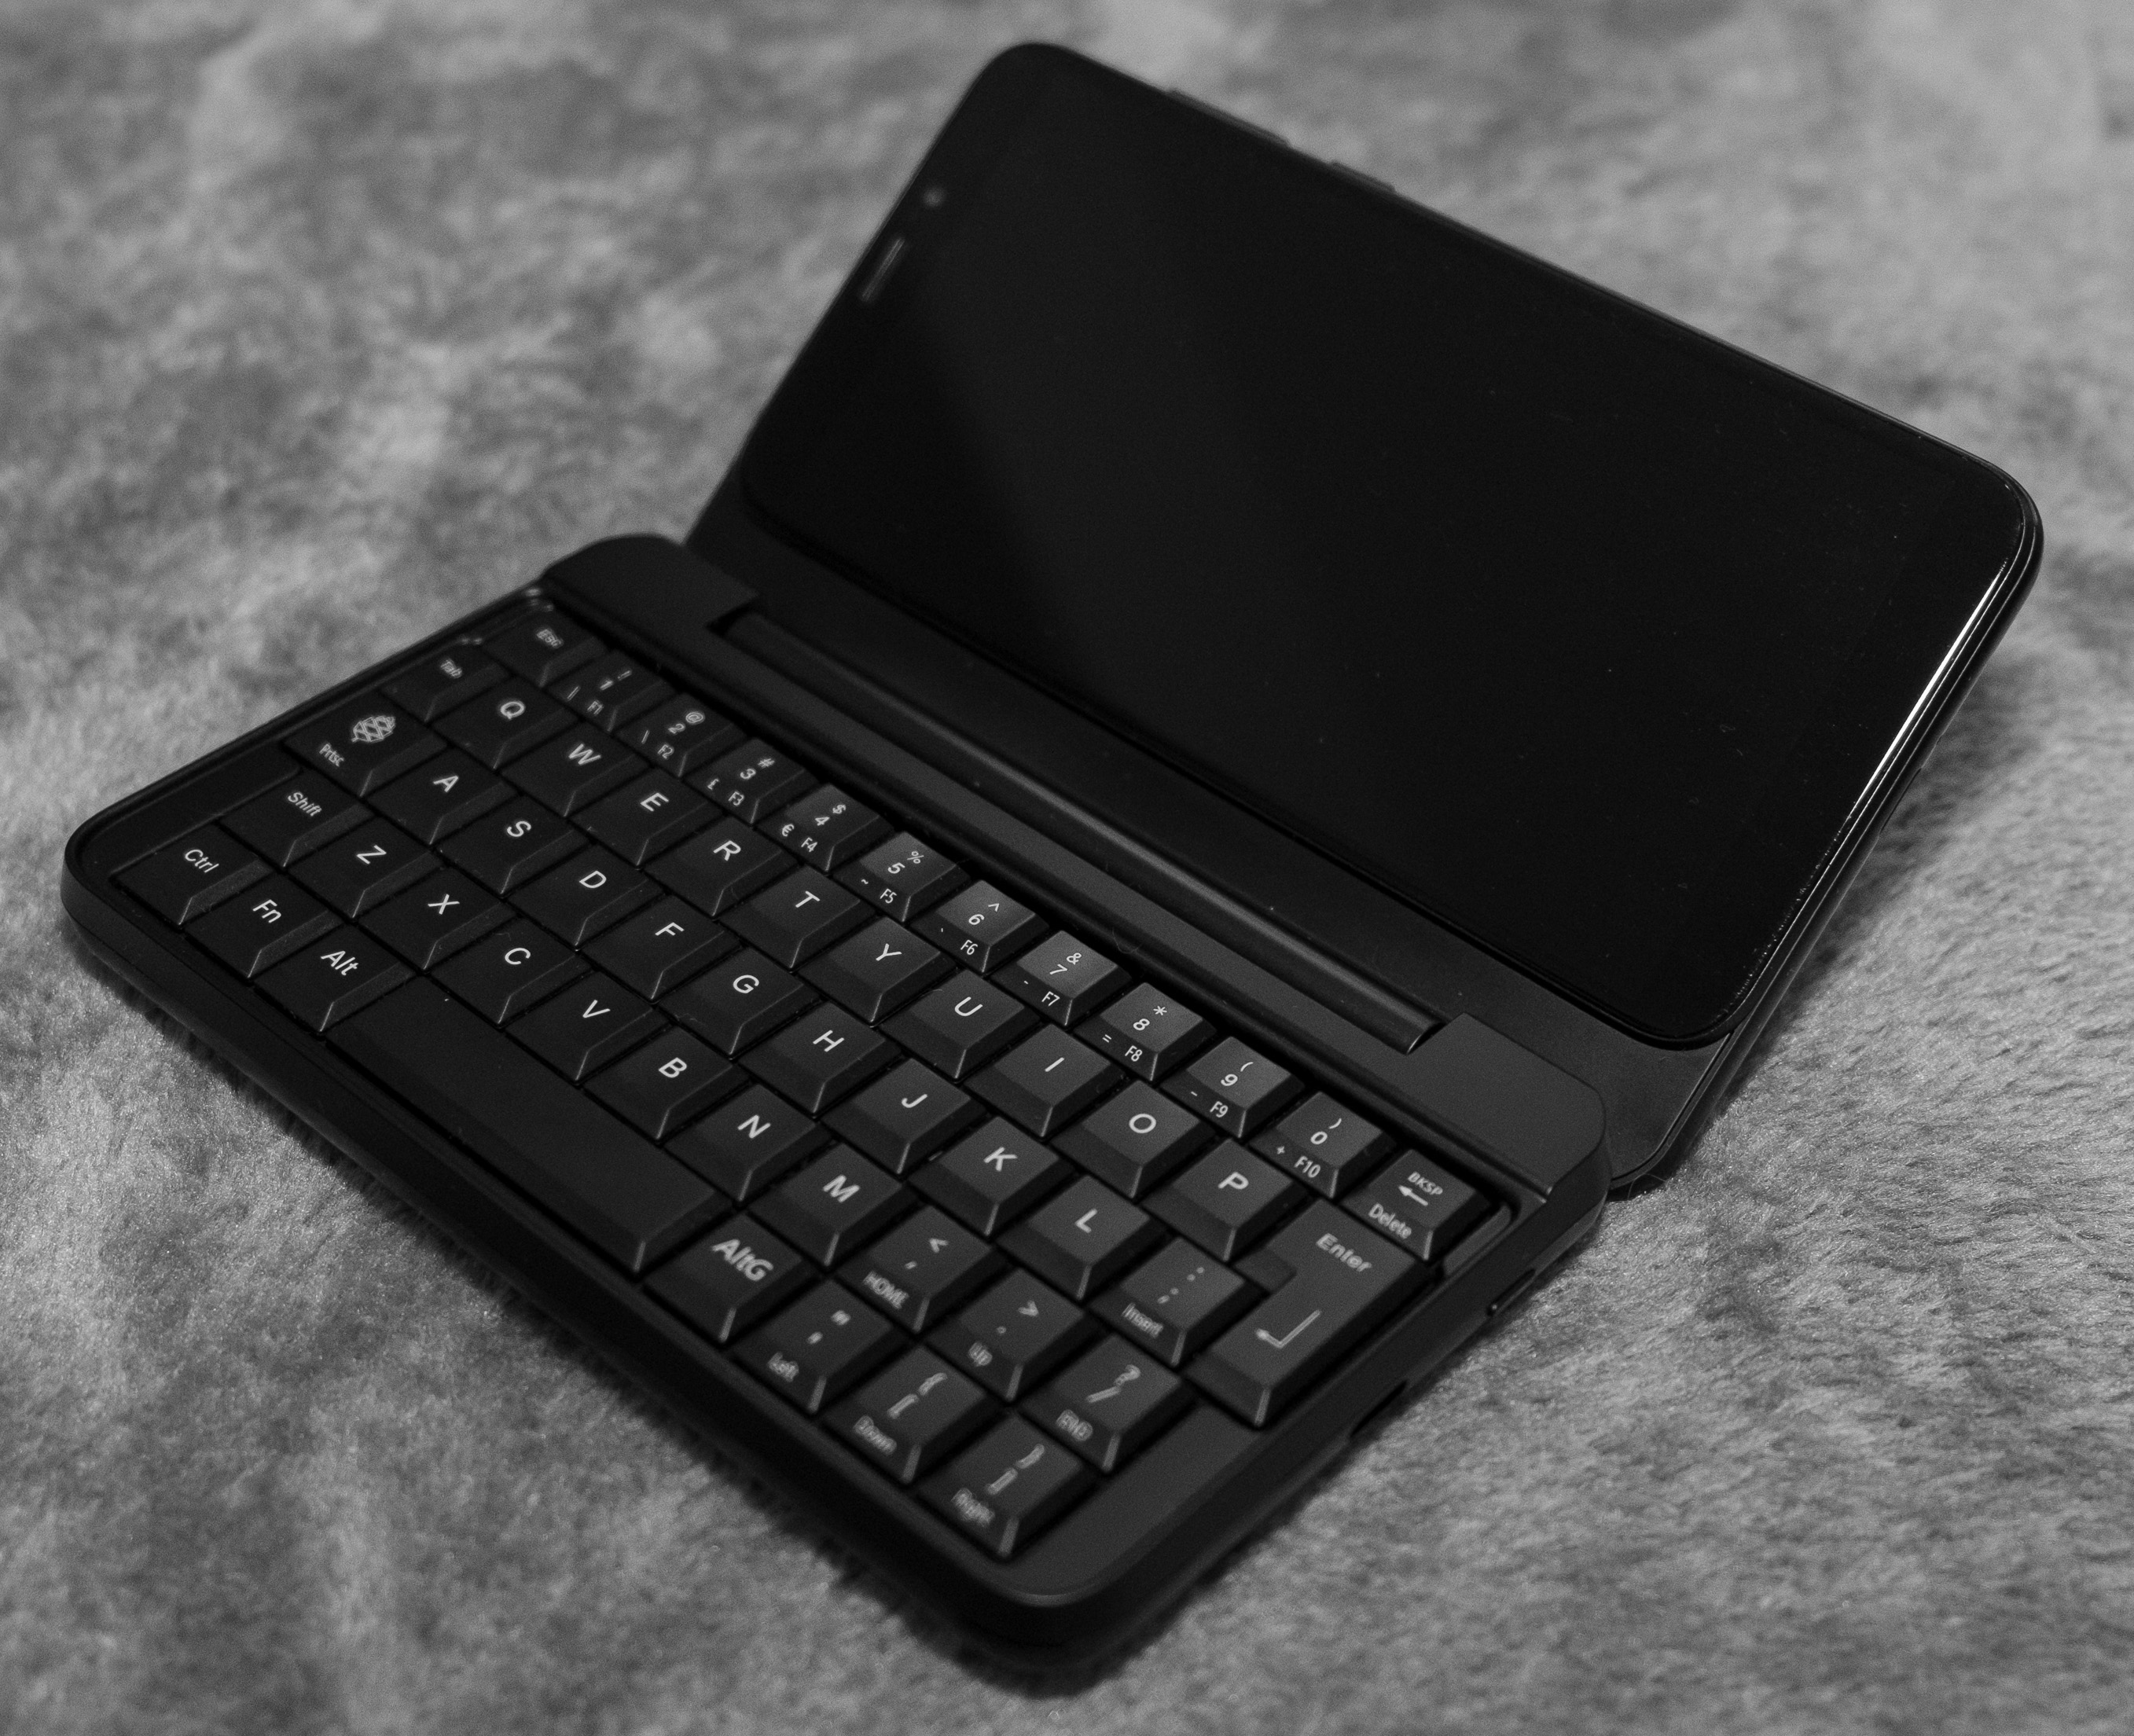 Pinephone with keyboard attached